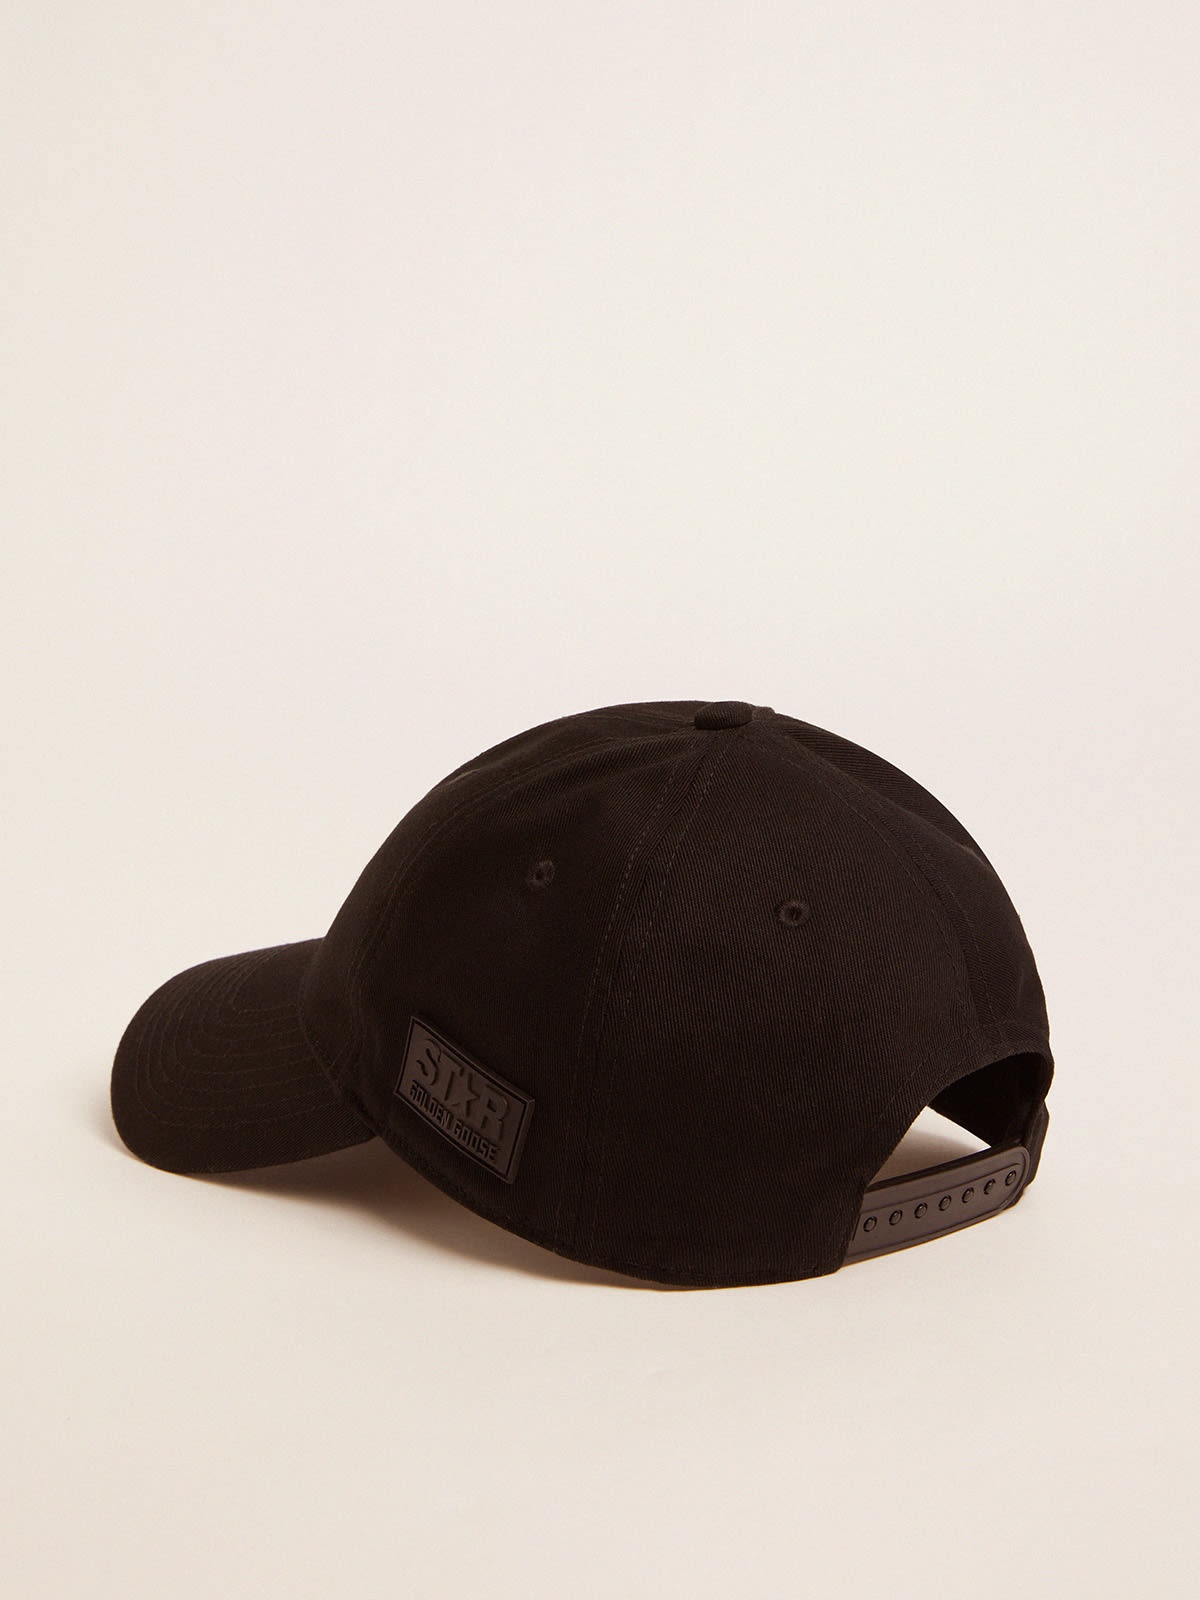 Black baseball cap with logo on the side - 3